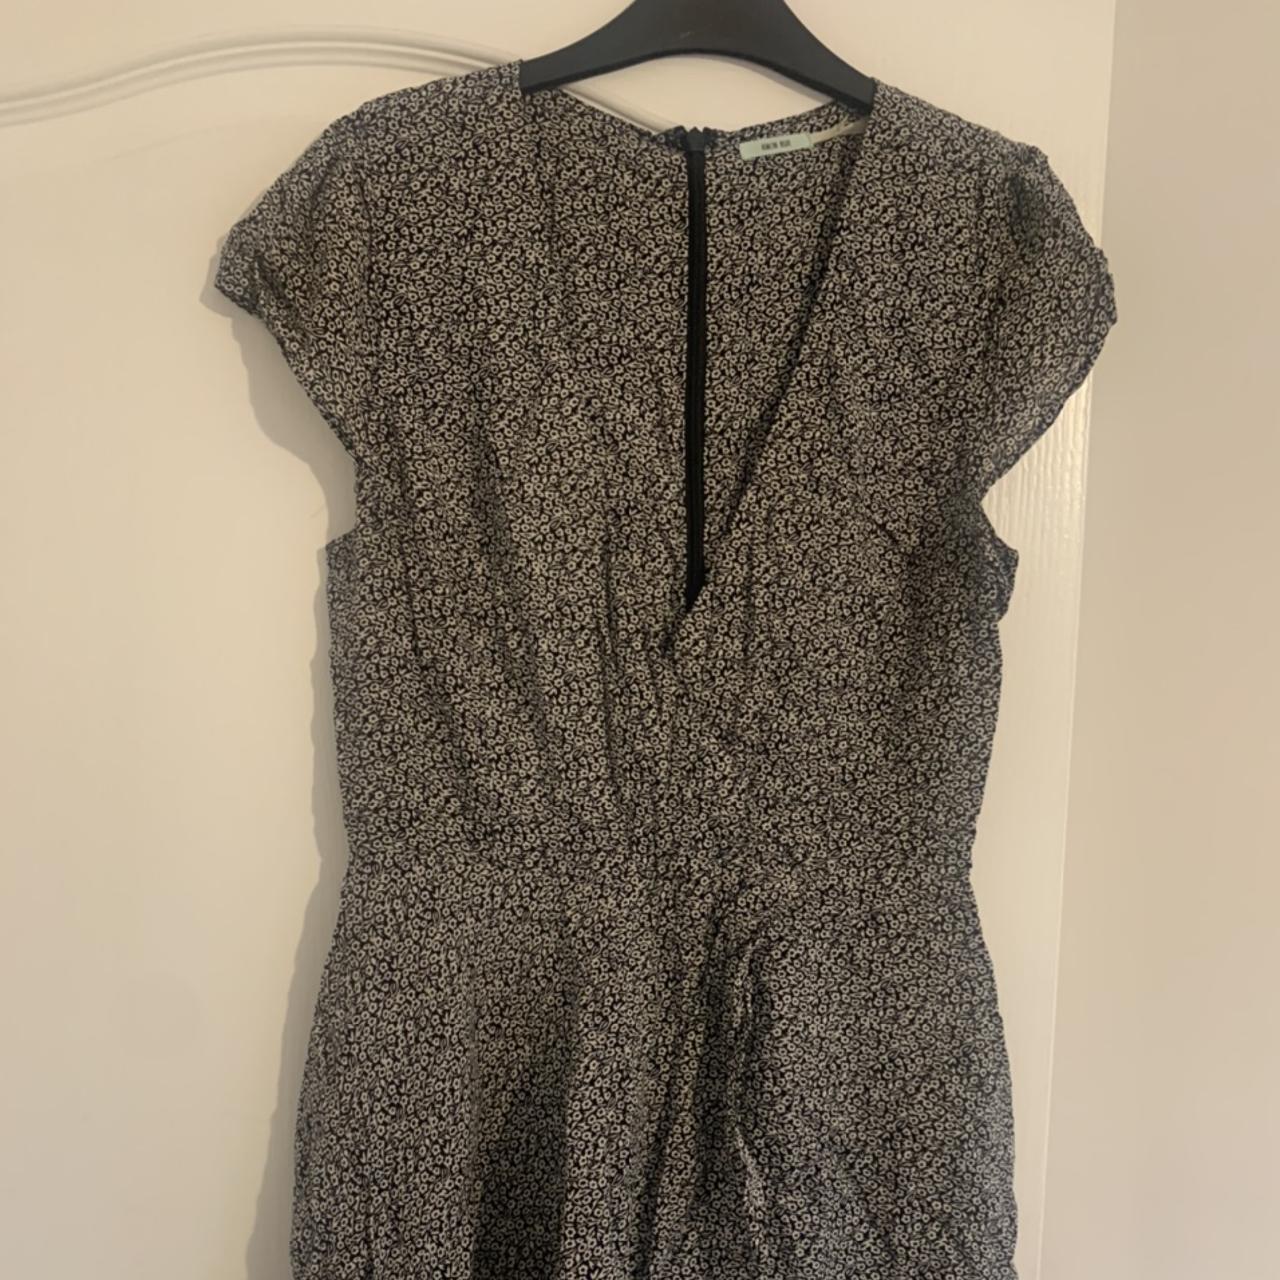 Urban outfitters floaty playsuit size xs - Depop